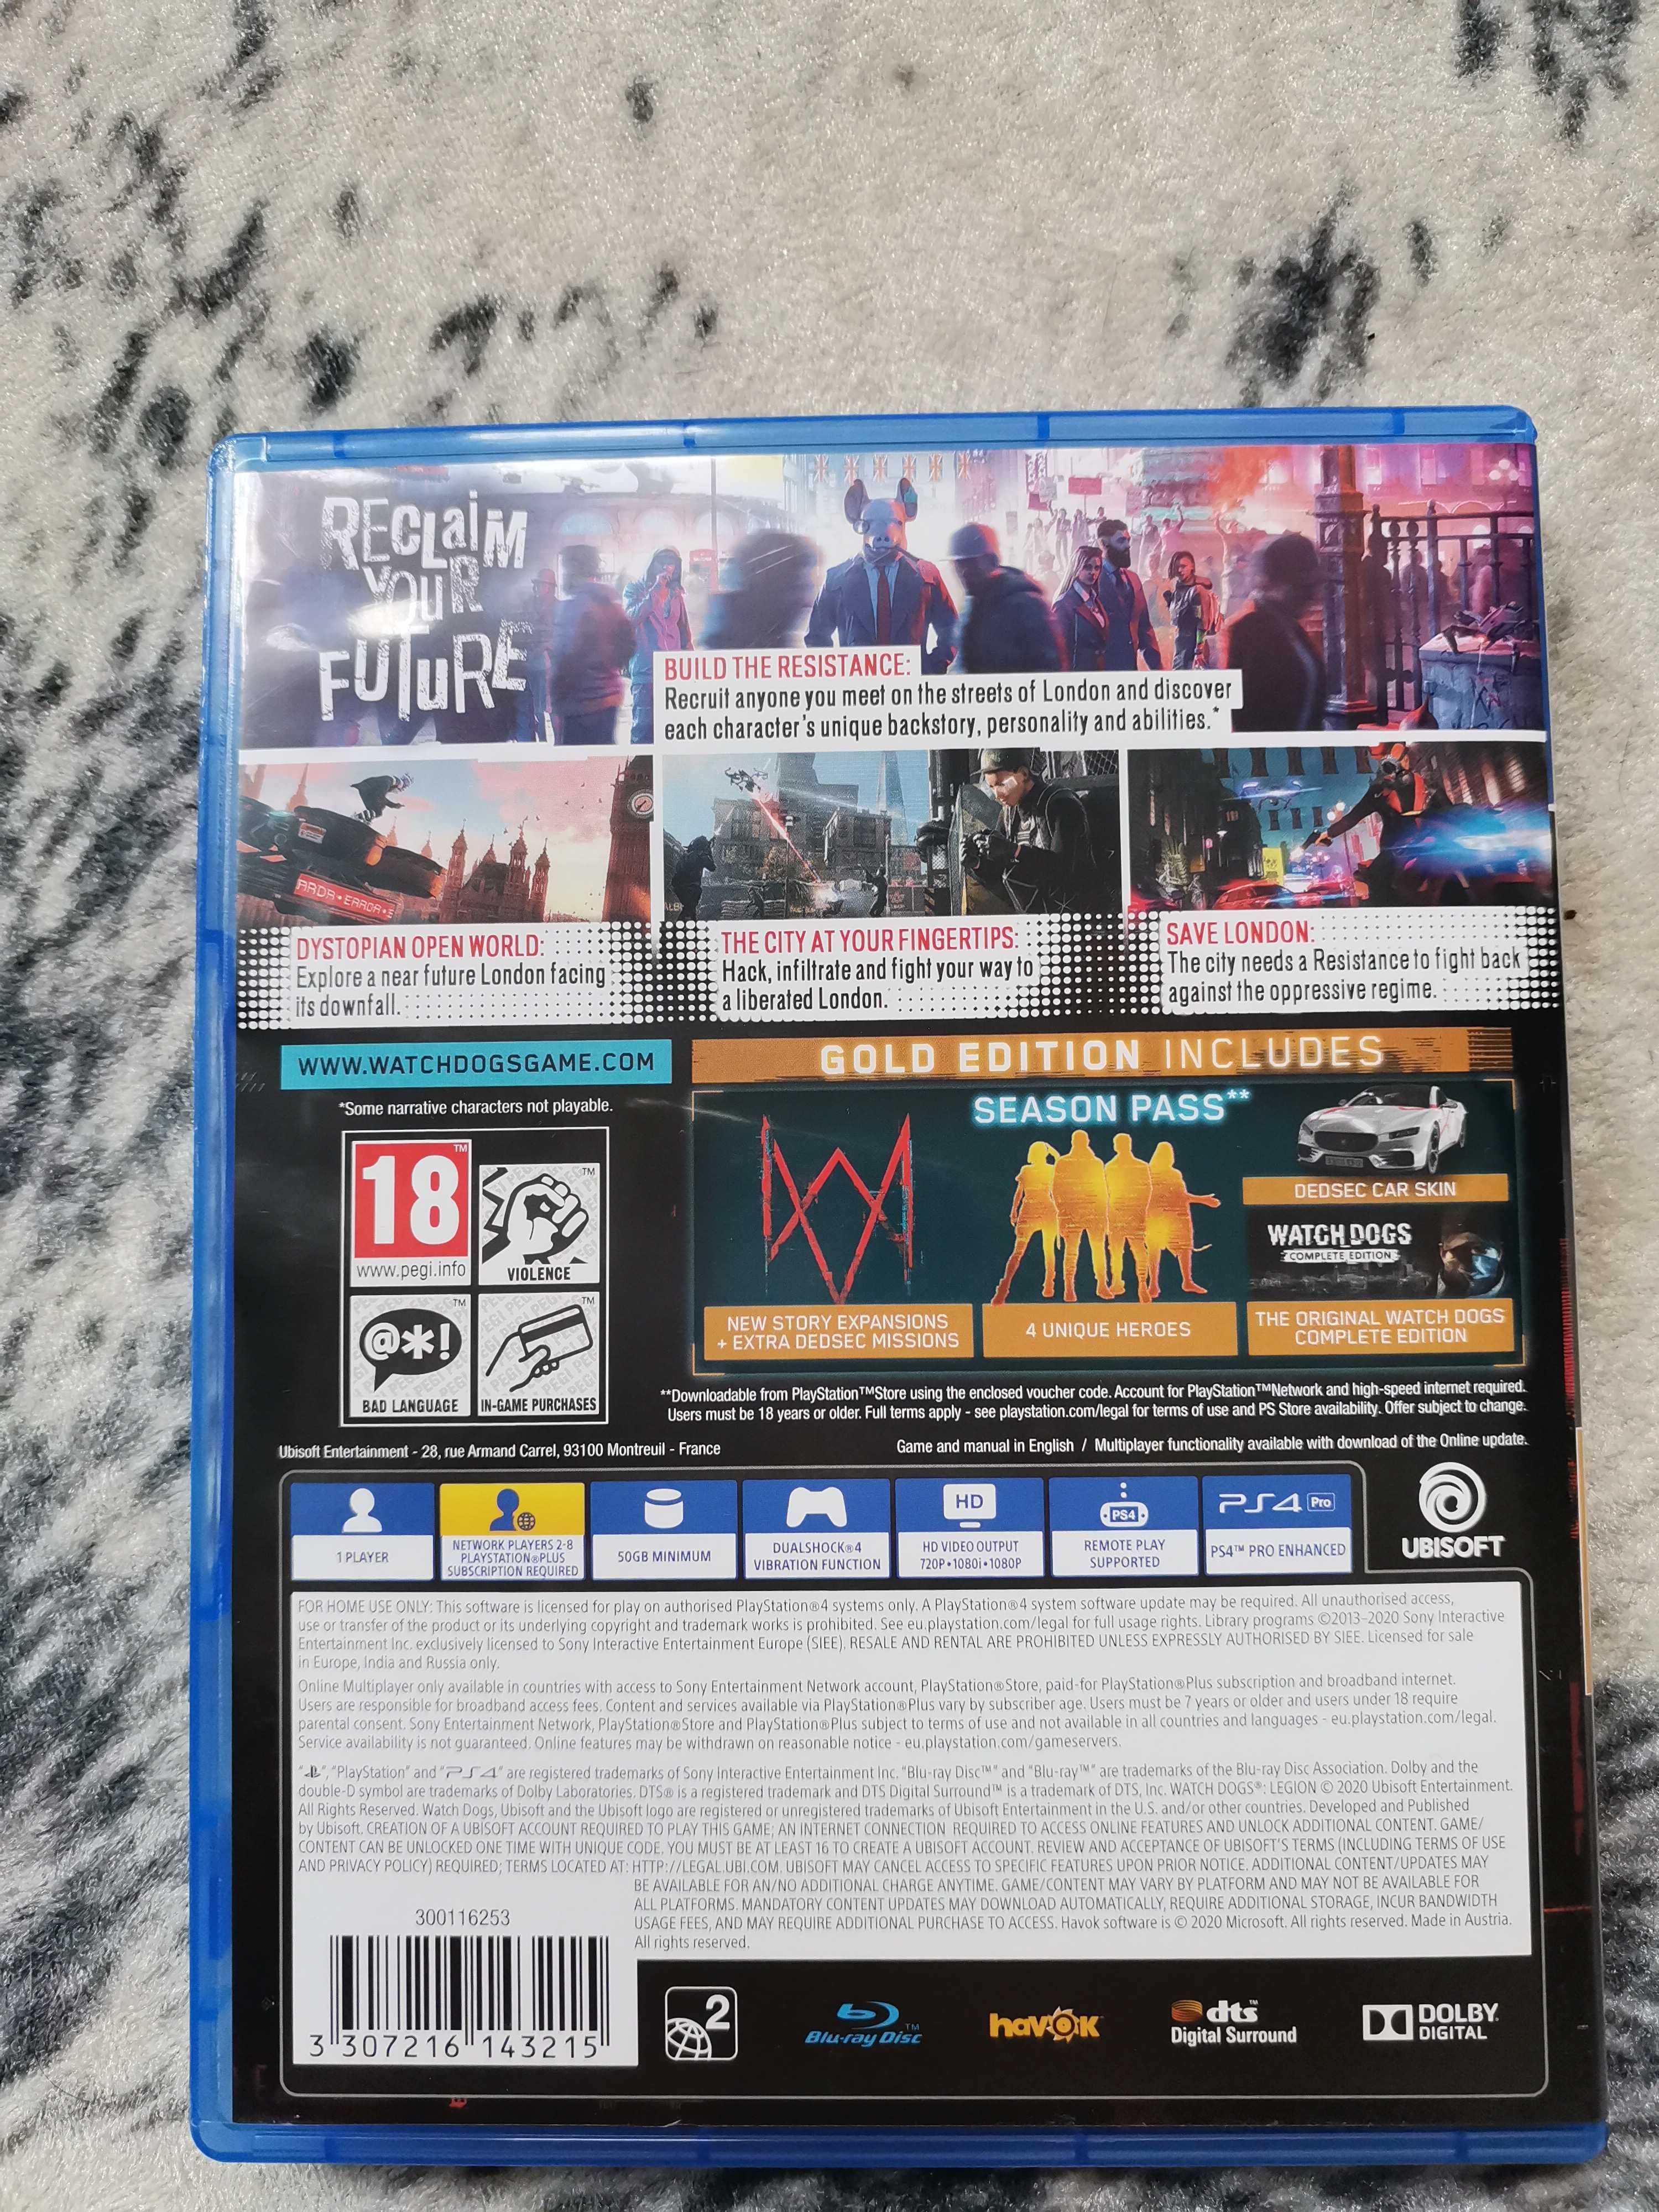 Watch dogs legion gold edition ps4